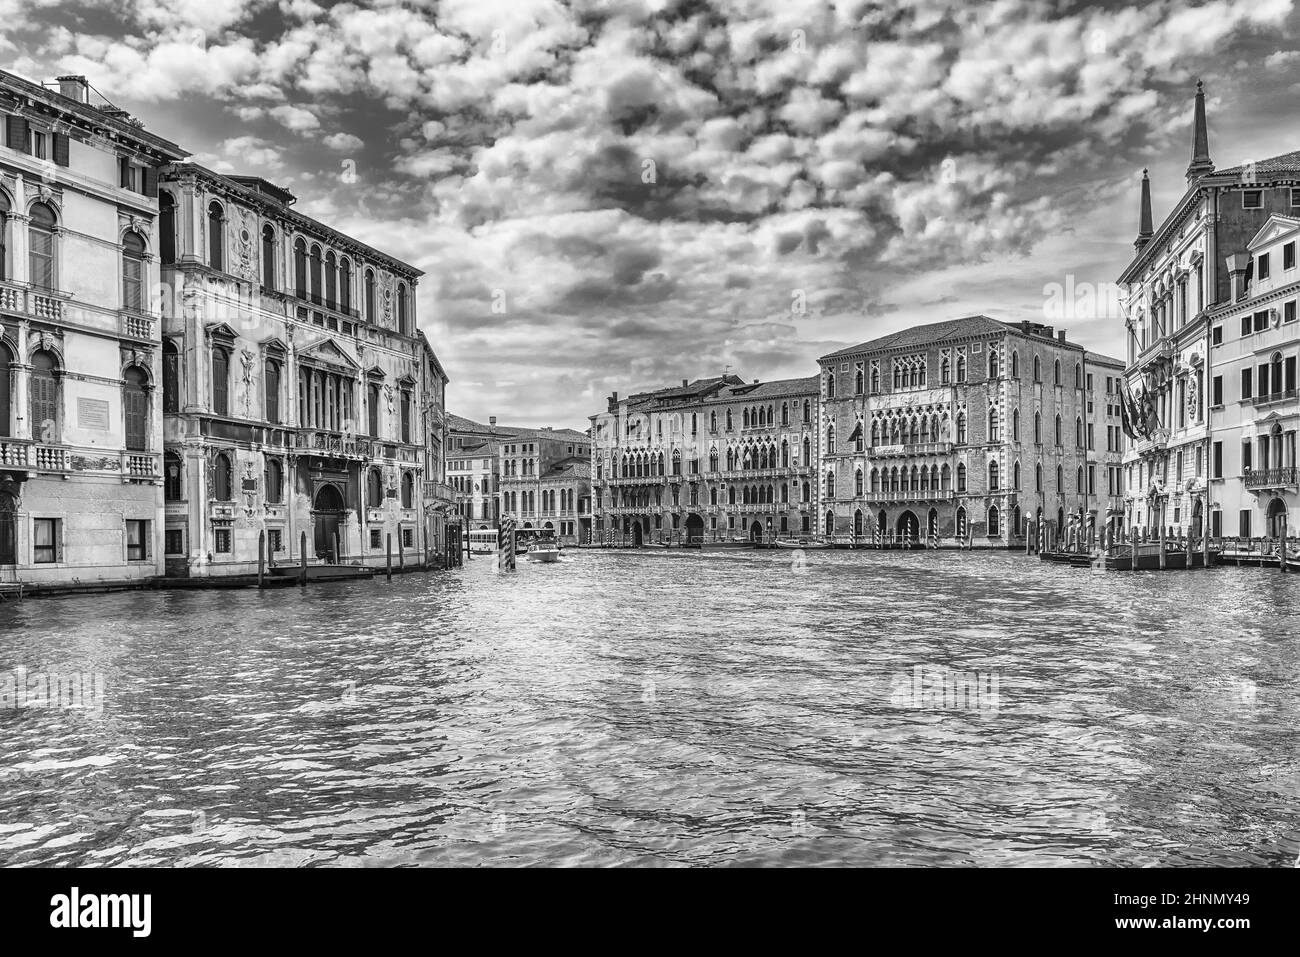 Scenic architecture along the Grand Canal in Venice, Italy Stock Photo